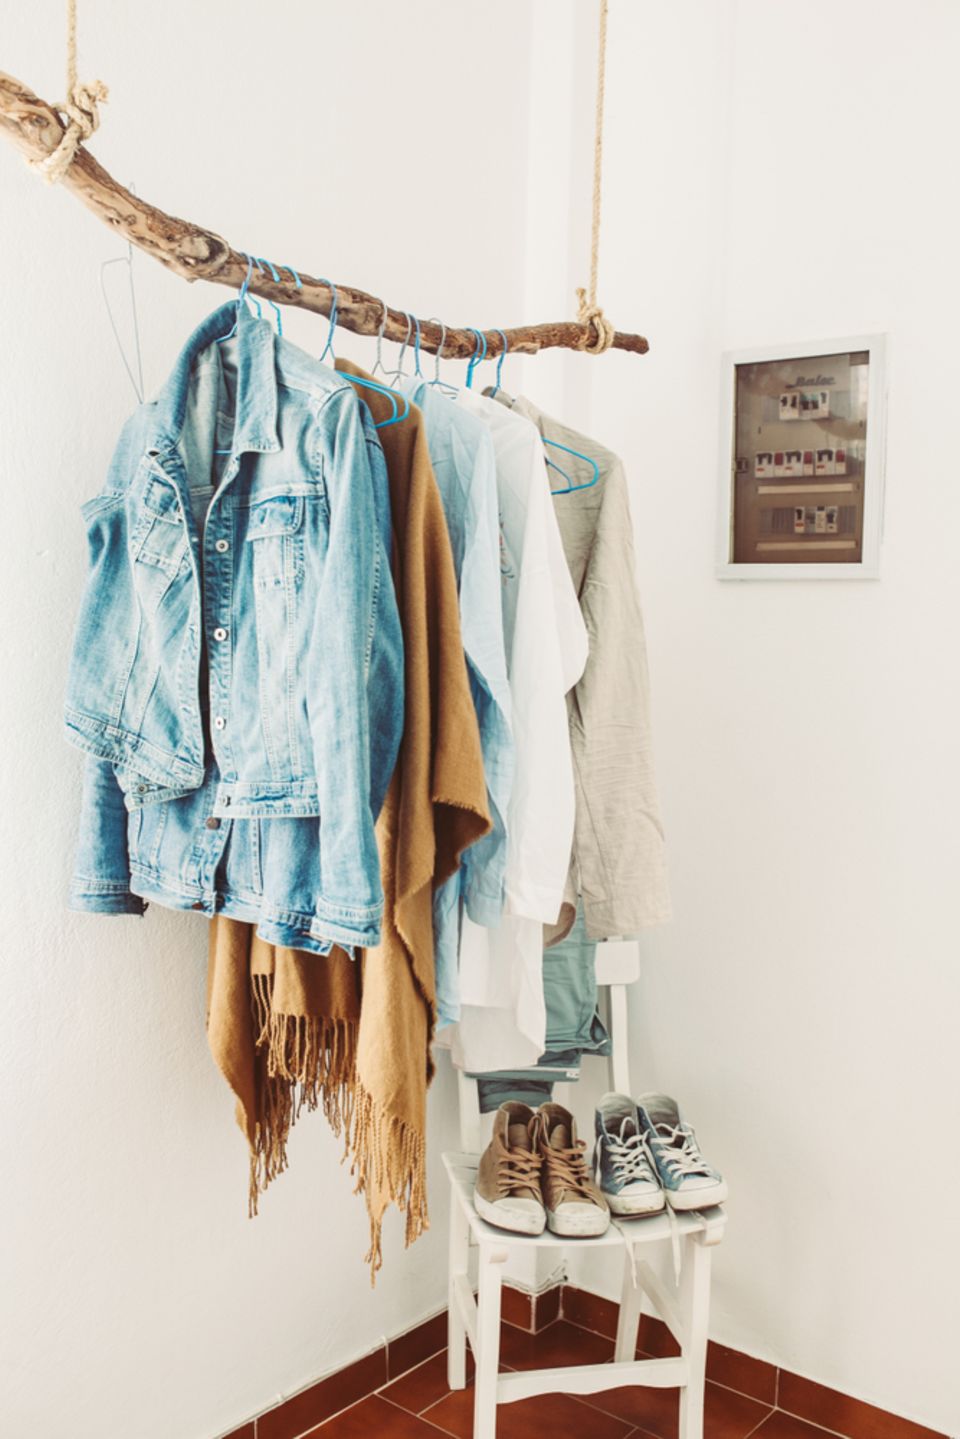 Store worn clothes: clothes rail made from a tree trunk